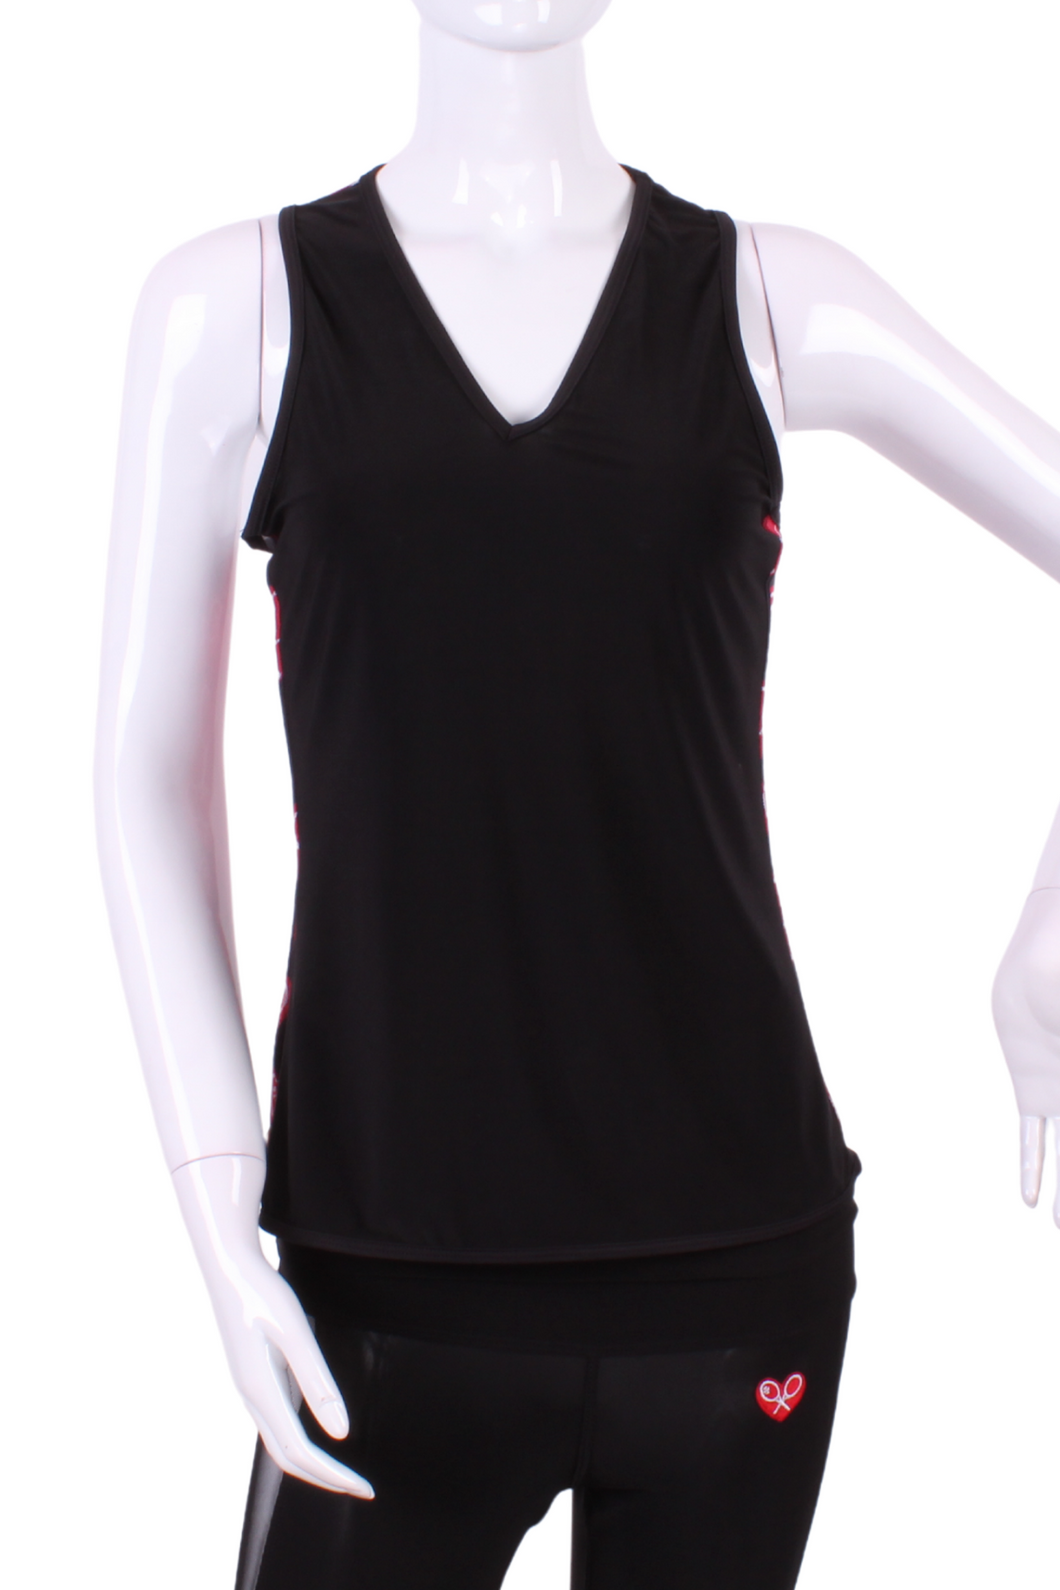 The simply elegant Vee Tank has a little vee in the front and a razor back.  Designed by a tennis player for comfort AND luxury - the pattern is made for a real woman’s body with curves and all!